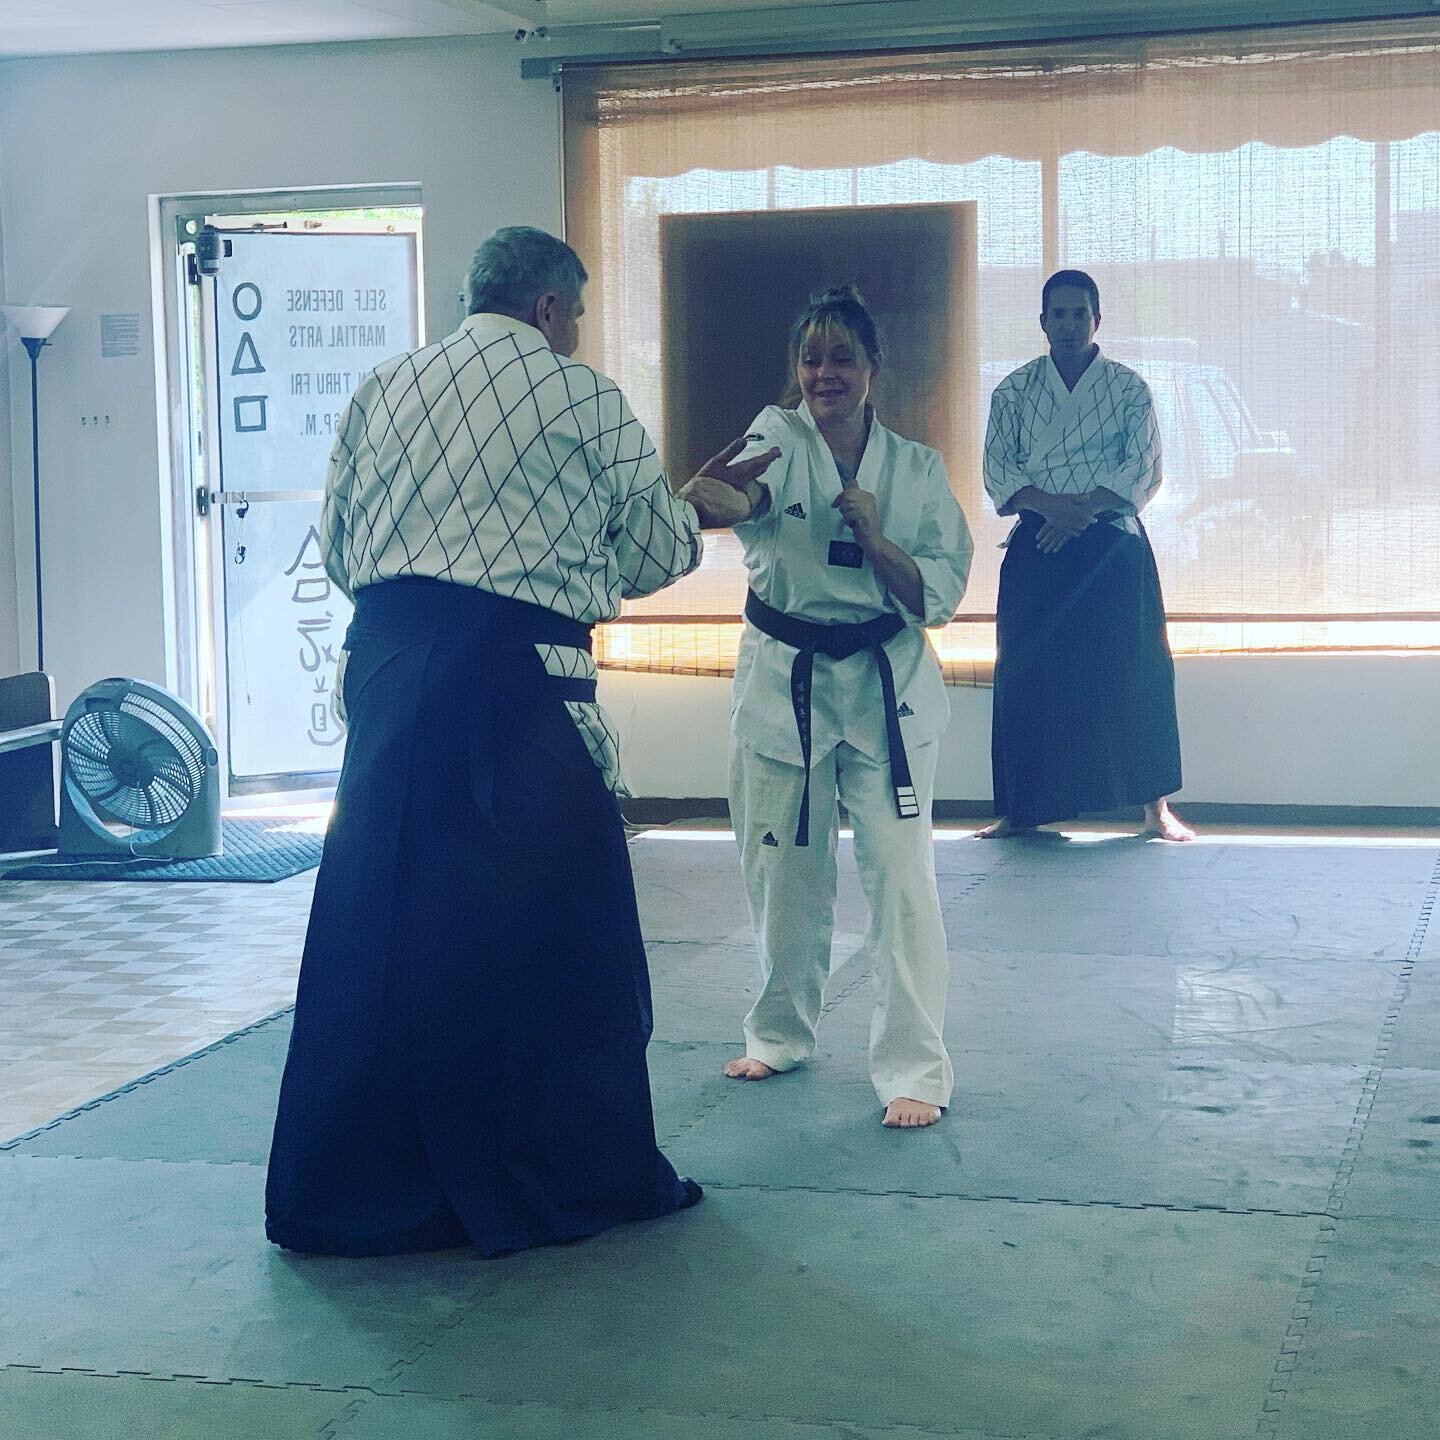 Thanks to Tenchinage Aikido and their instructors for putting on this Seminar over the weekend 🔥 Everyone had a great time learning some new techniques. 

Interested in our classes? Send us a DM or contact us at steelcityselfdefense@gmail.com! 🥊 

